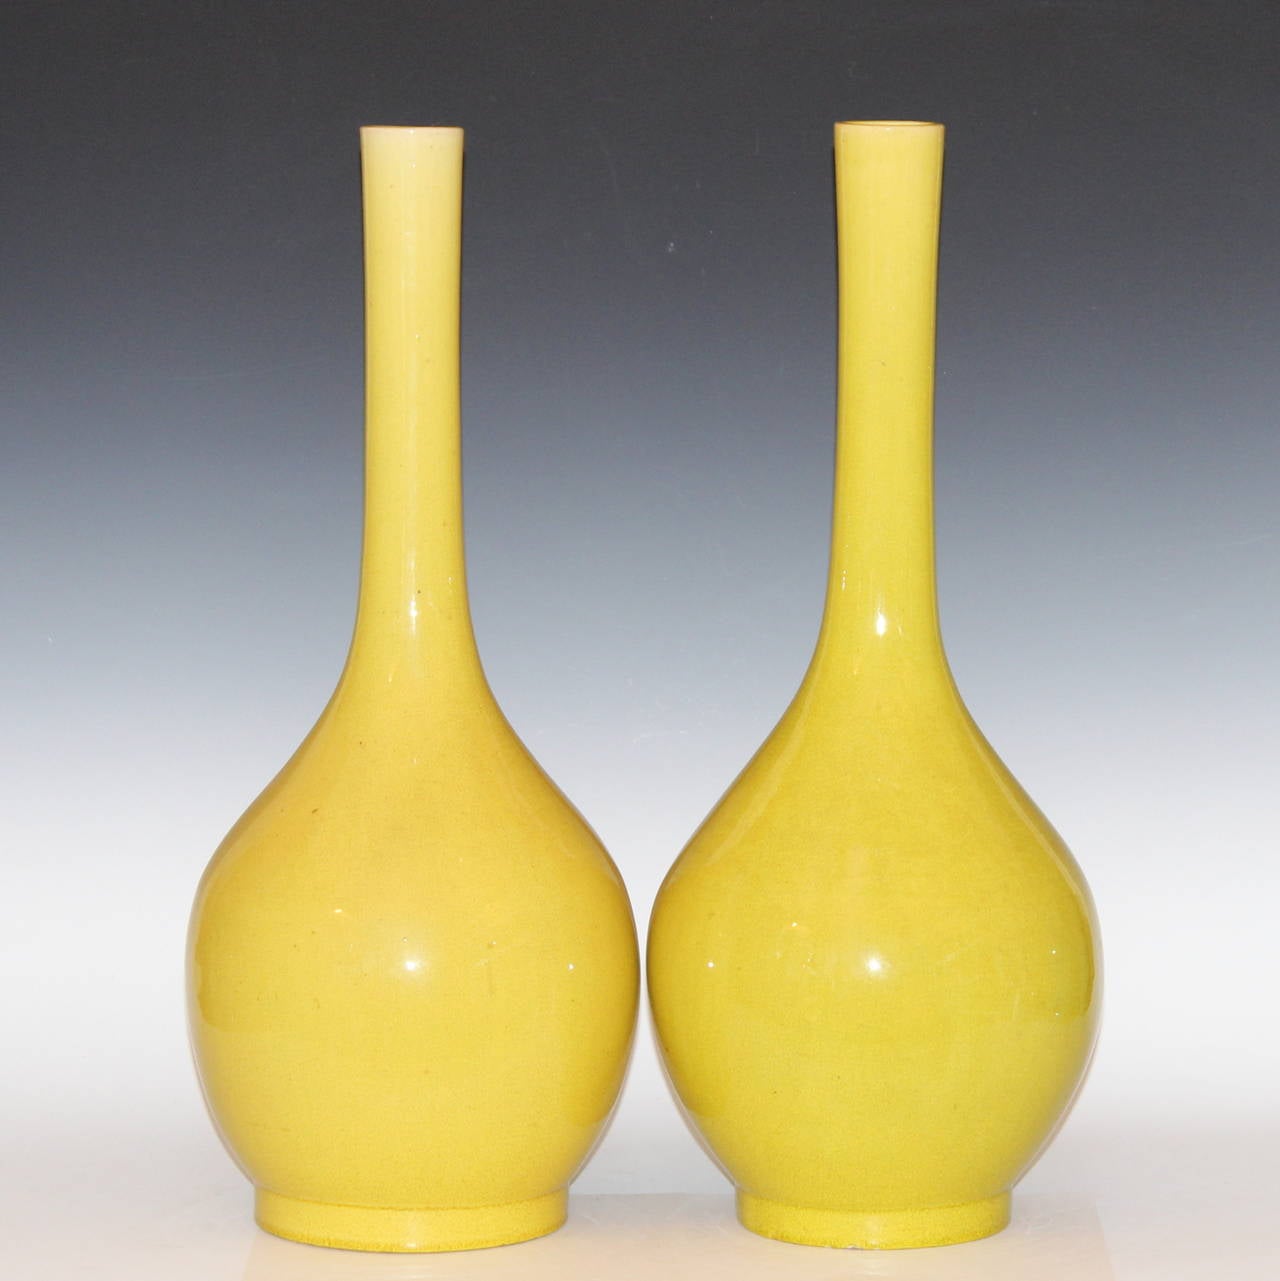 Large pair of antique Kyoto Pottery point bottle vases in striking, translucent, acid yellow crackle glaze, circa 1910. 22